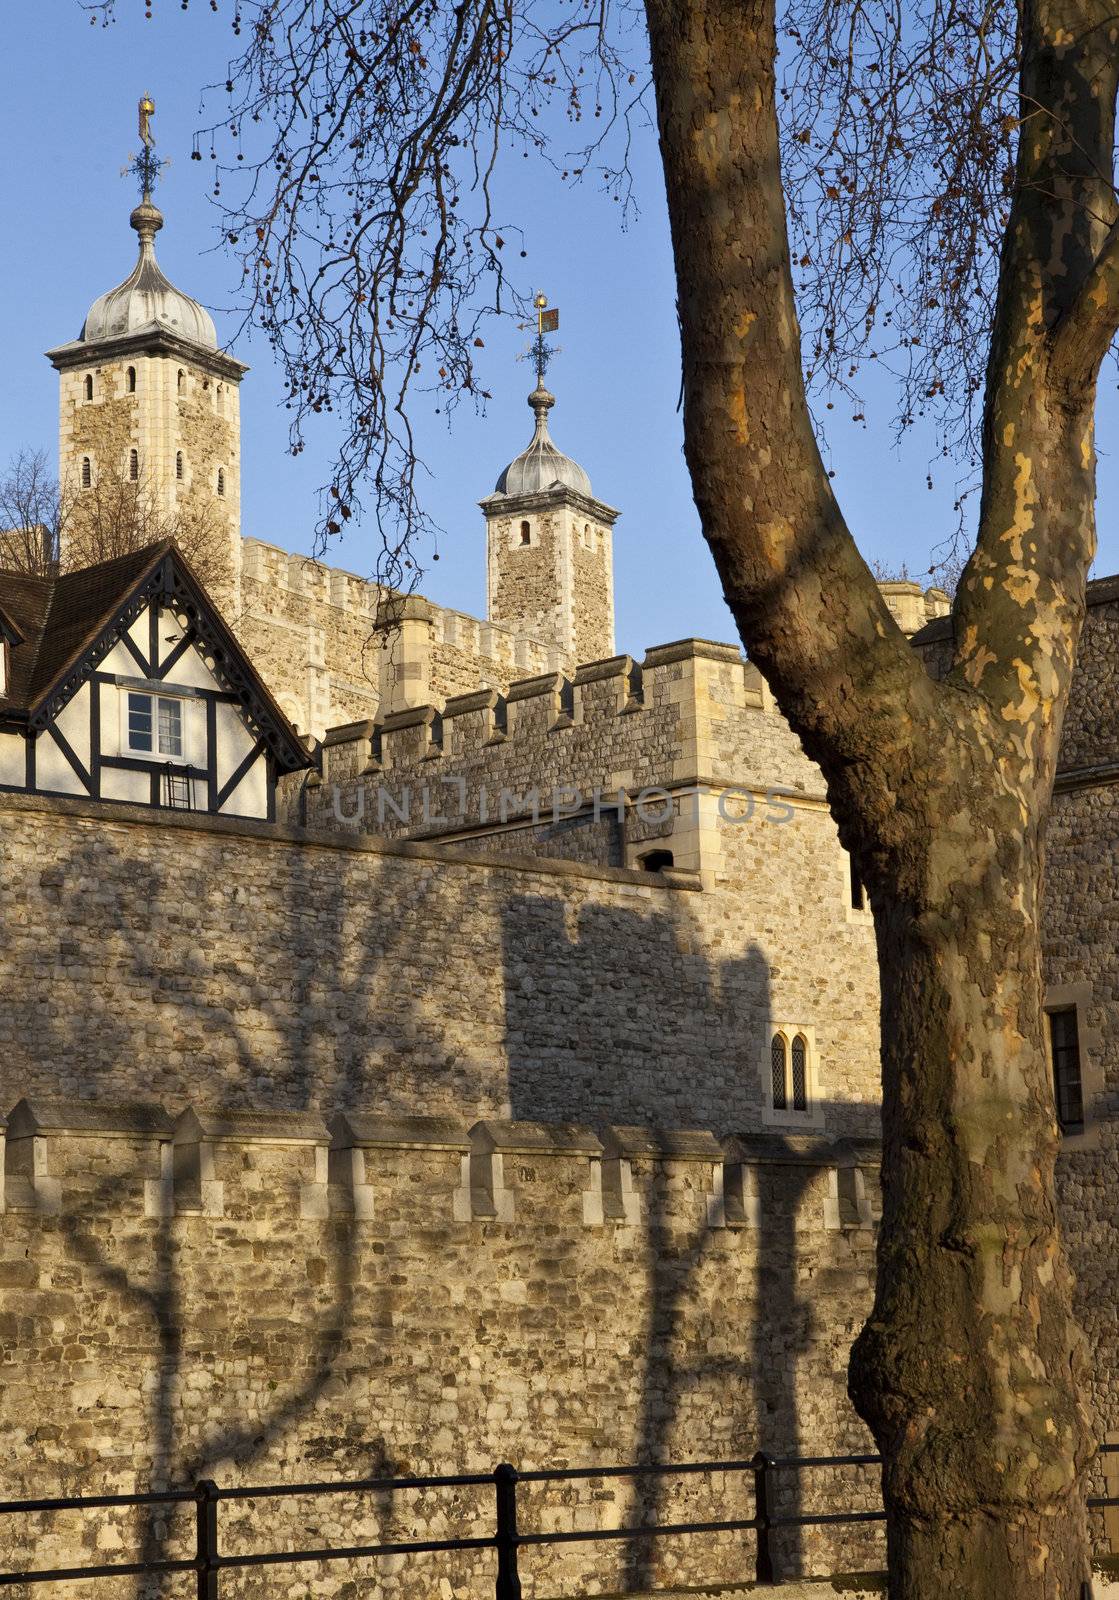 Tower of London.